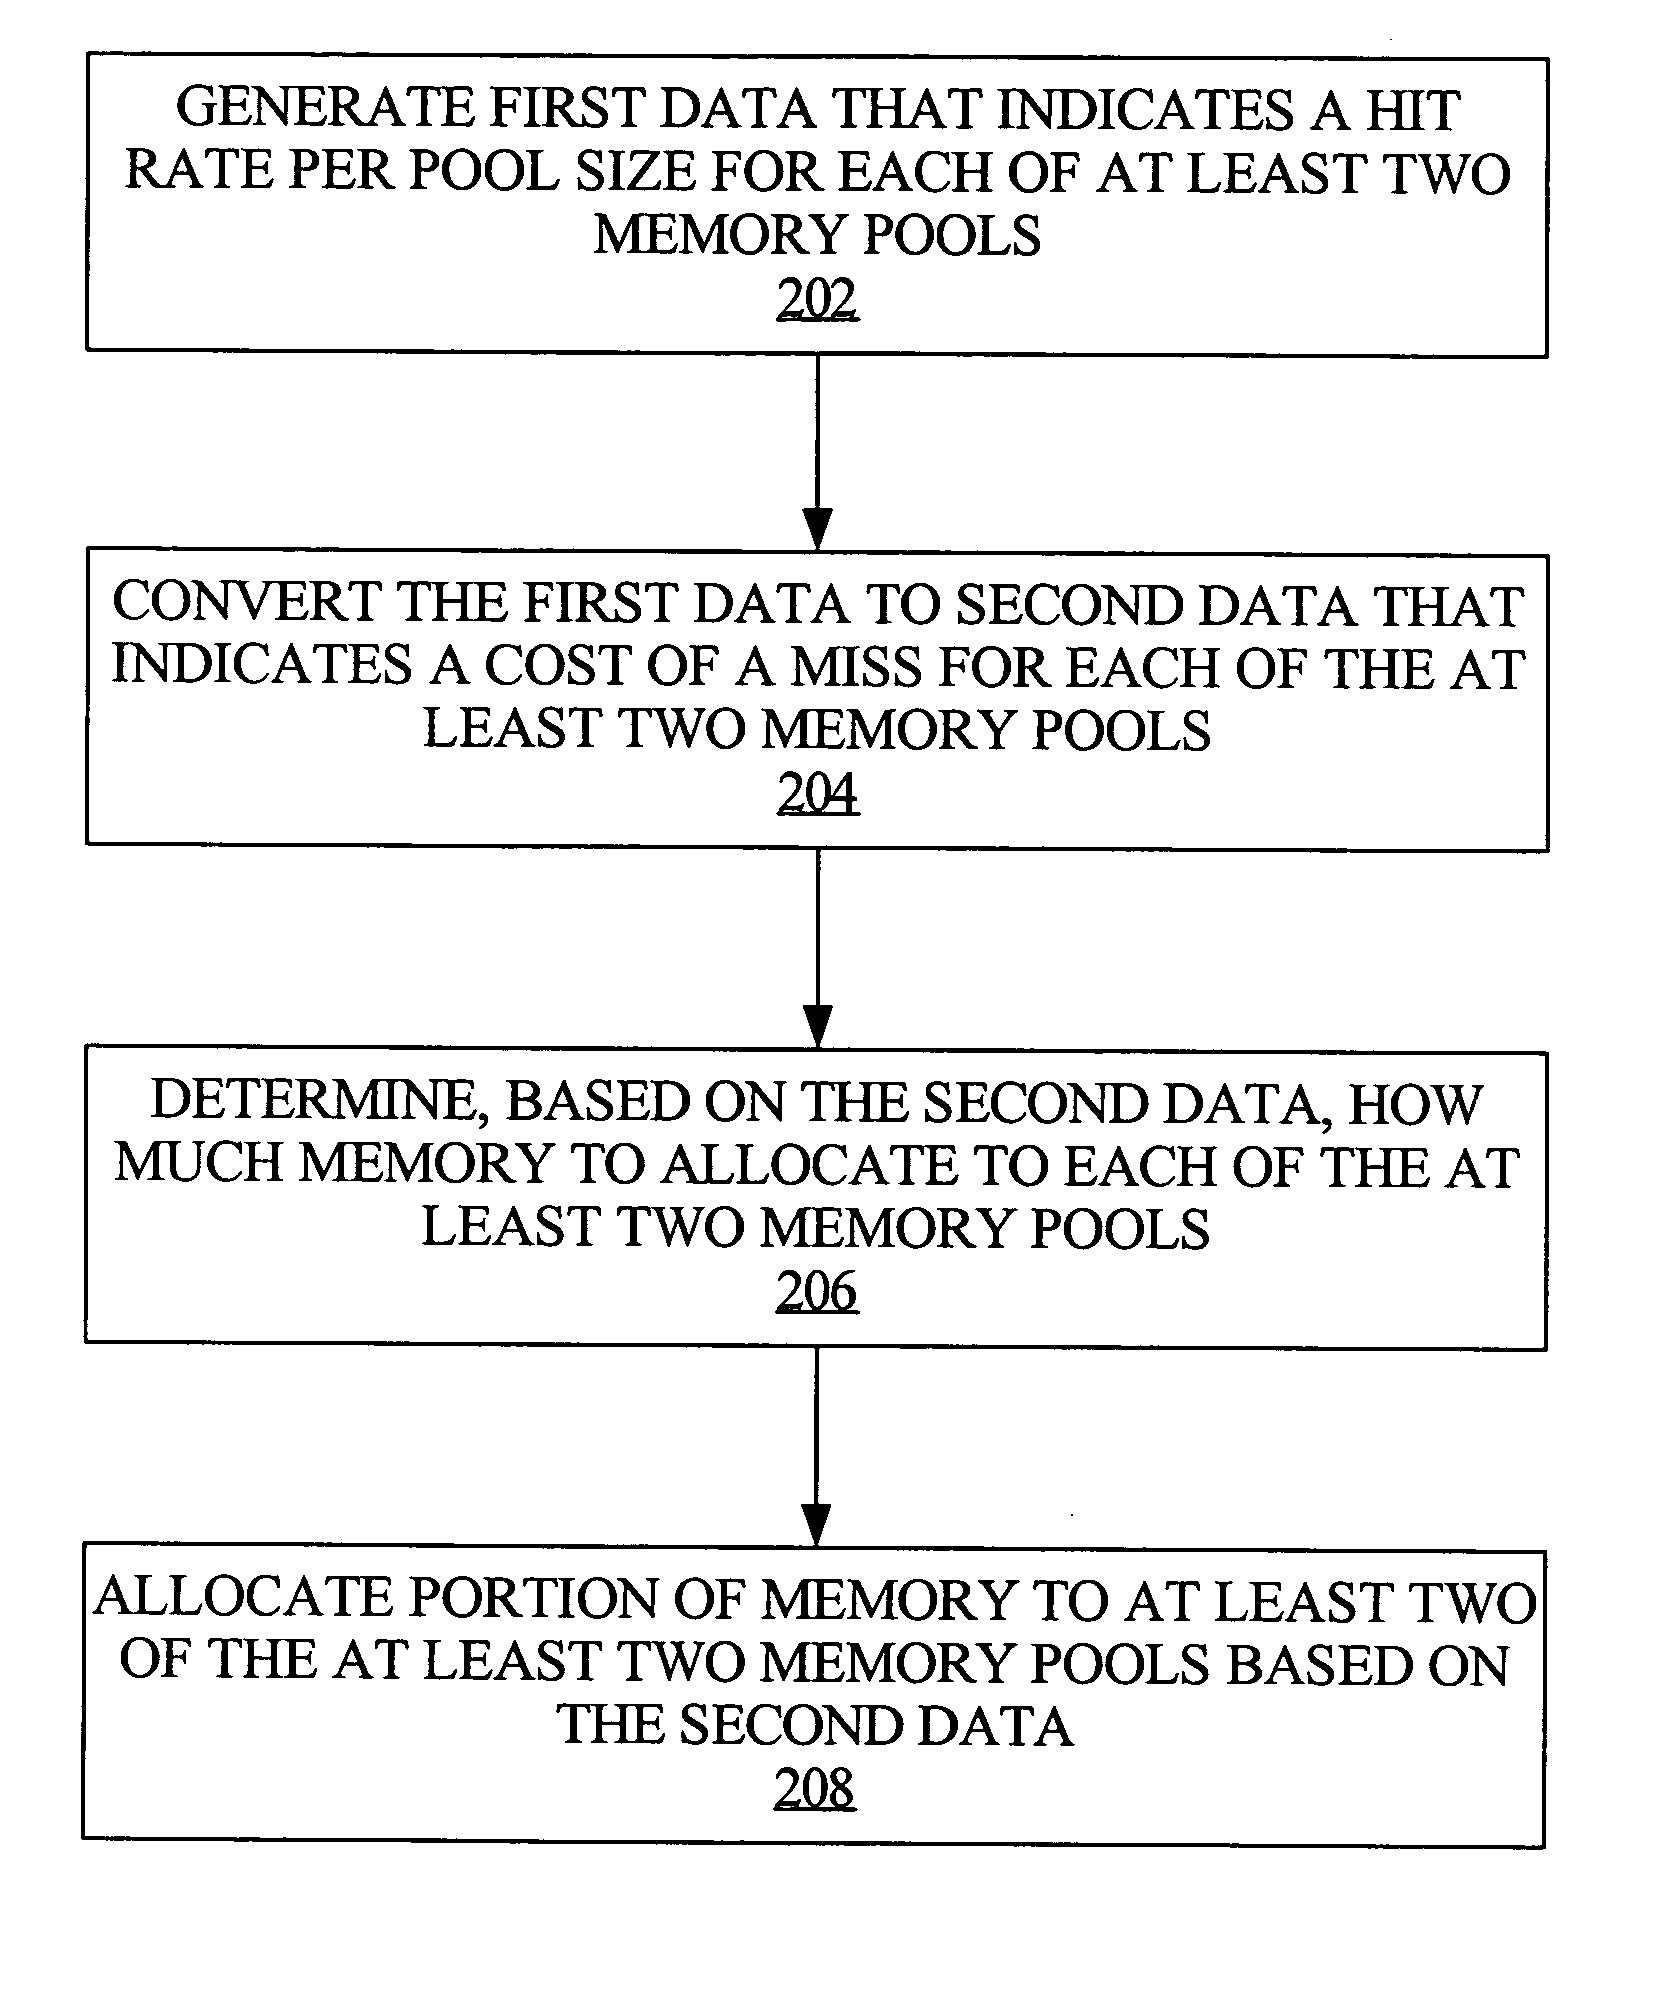 Techniques for automated allocation of memory among a plurality of pools